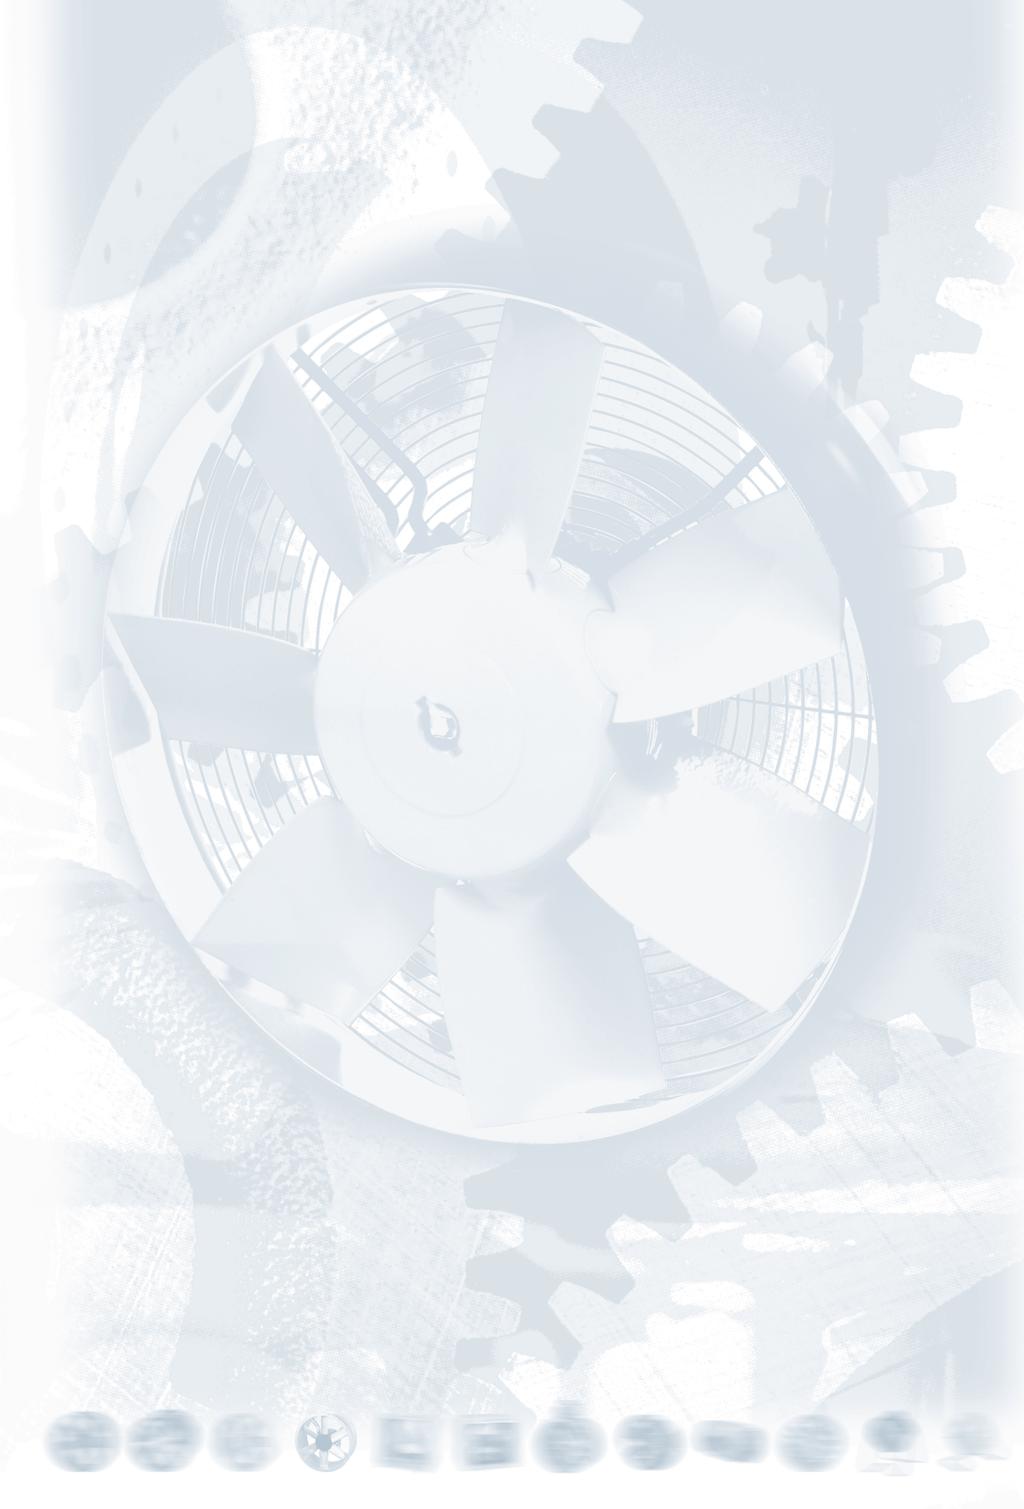 CYLINDRICAL CASED AXIAL FLOW FANS TGT Series Additional Information Standard air direction: form (B)